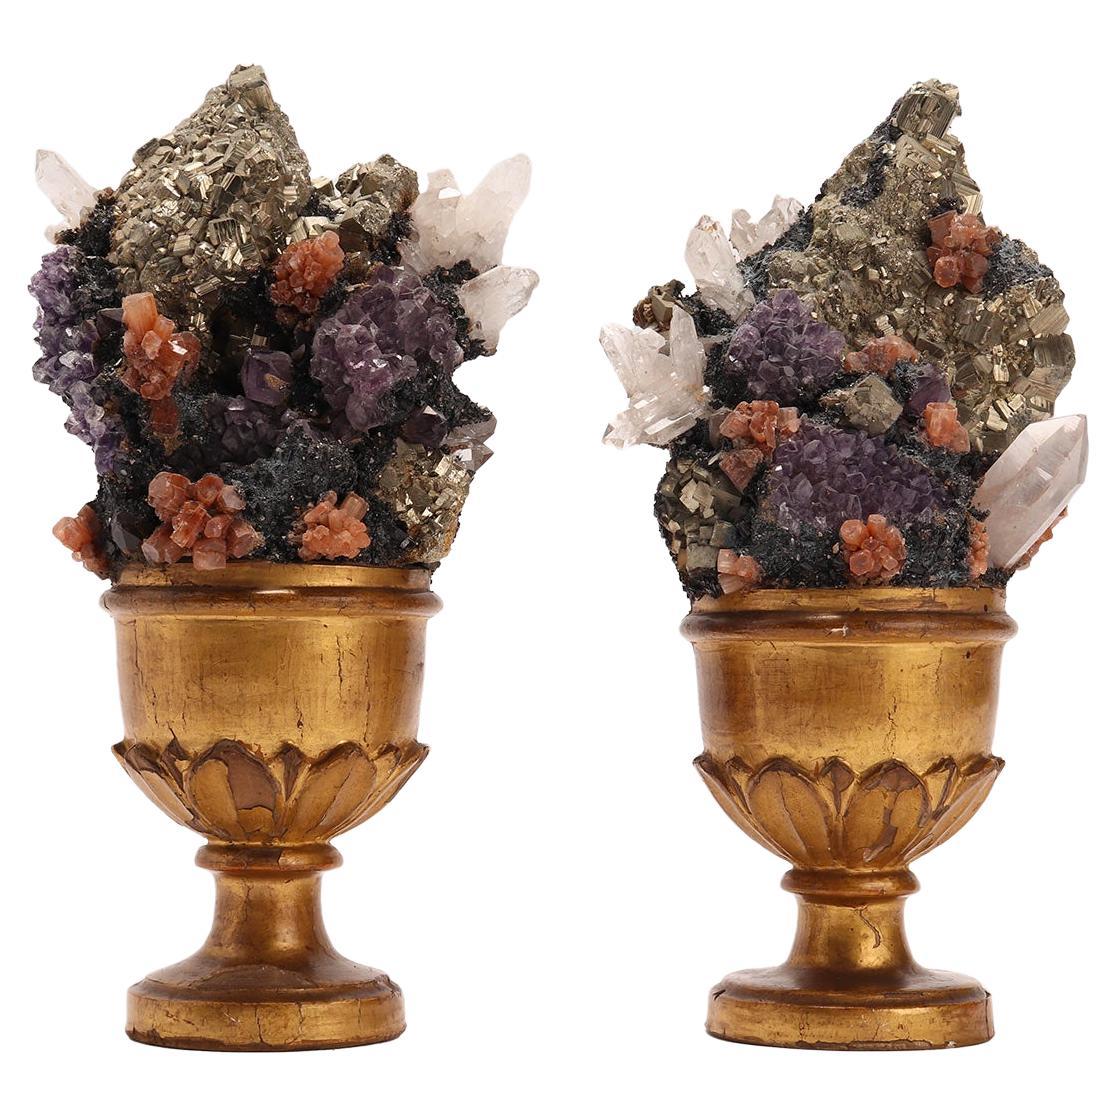 Pair of Rock Crystals, Amethyste, Pyrite and Aragonite Druzes, Italy 1880 For Sale